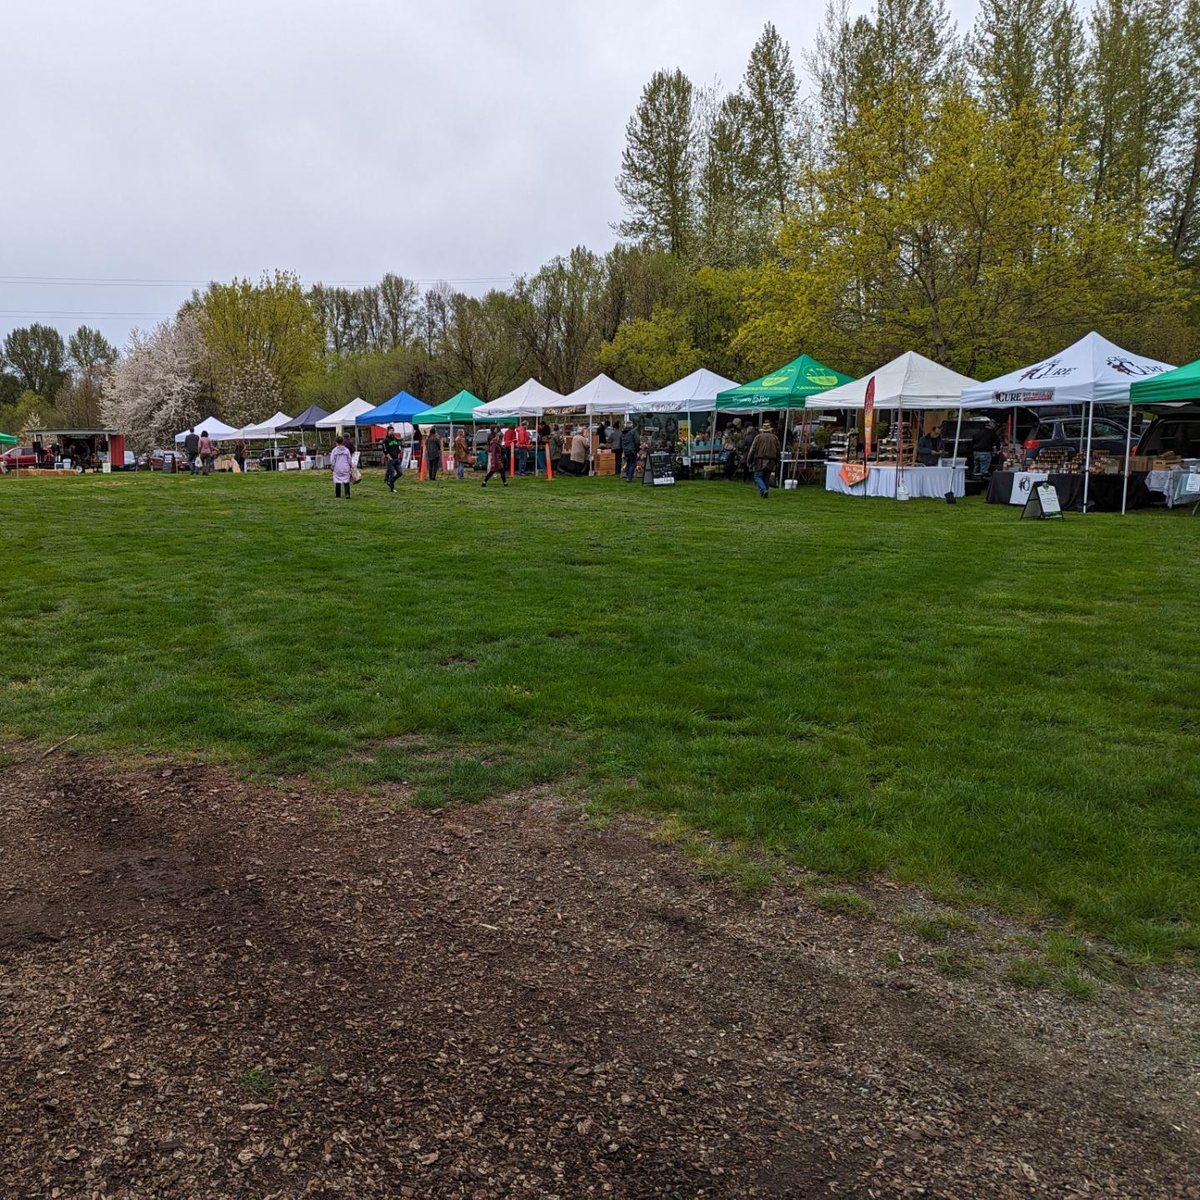 Don't let a little drizzle stop you from popping by the farmers market today.  We are in our regular field today from 9-1 at the CV Exhibition Grounds.  The local goodness is overflowing. 

Today we will also be celebrating our 32nd Birthday.  The ceremony starts at 10.